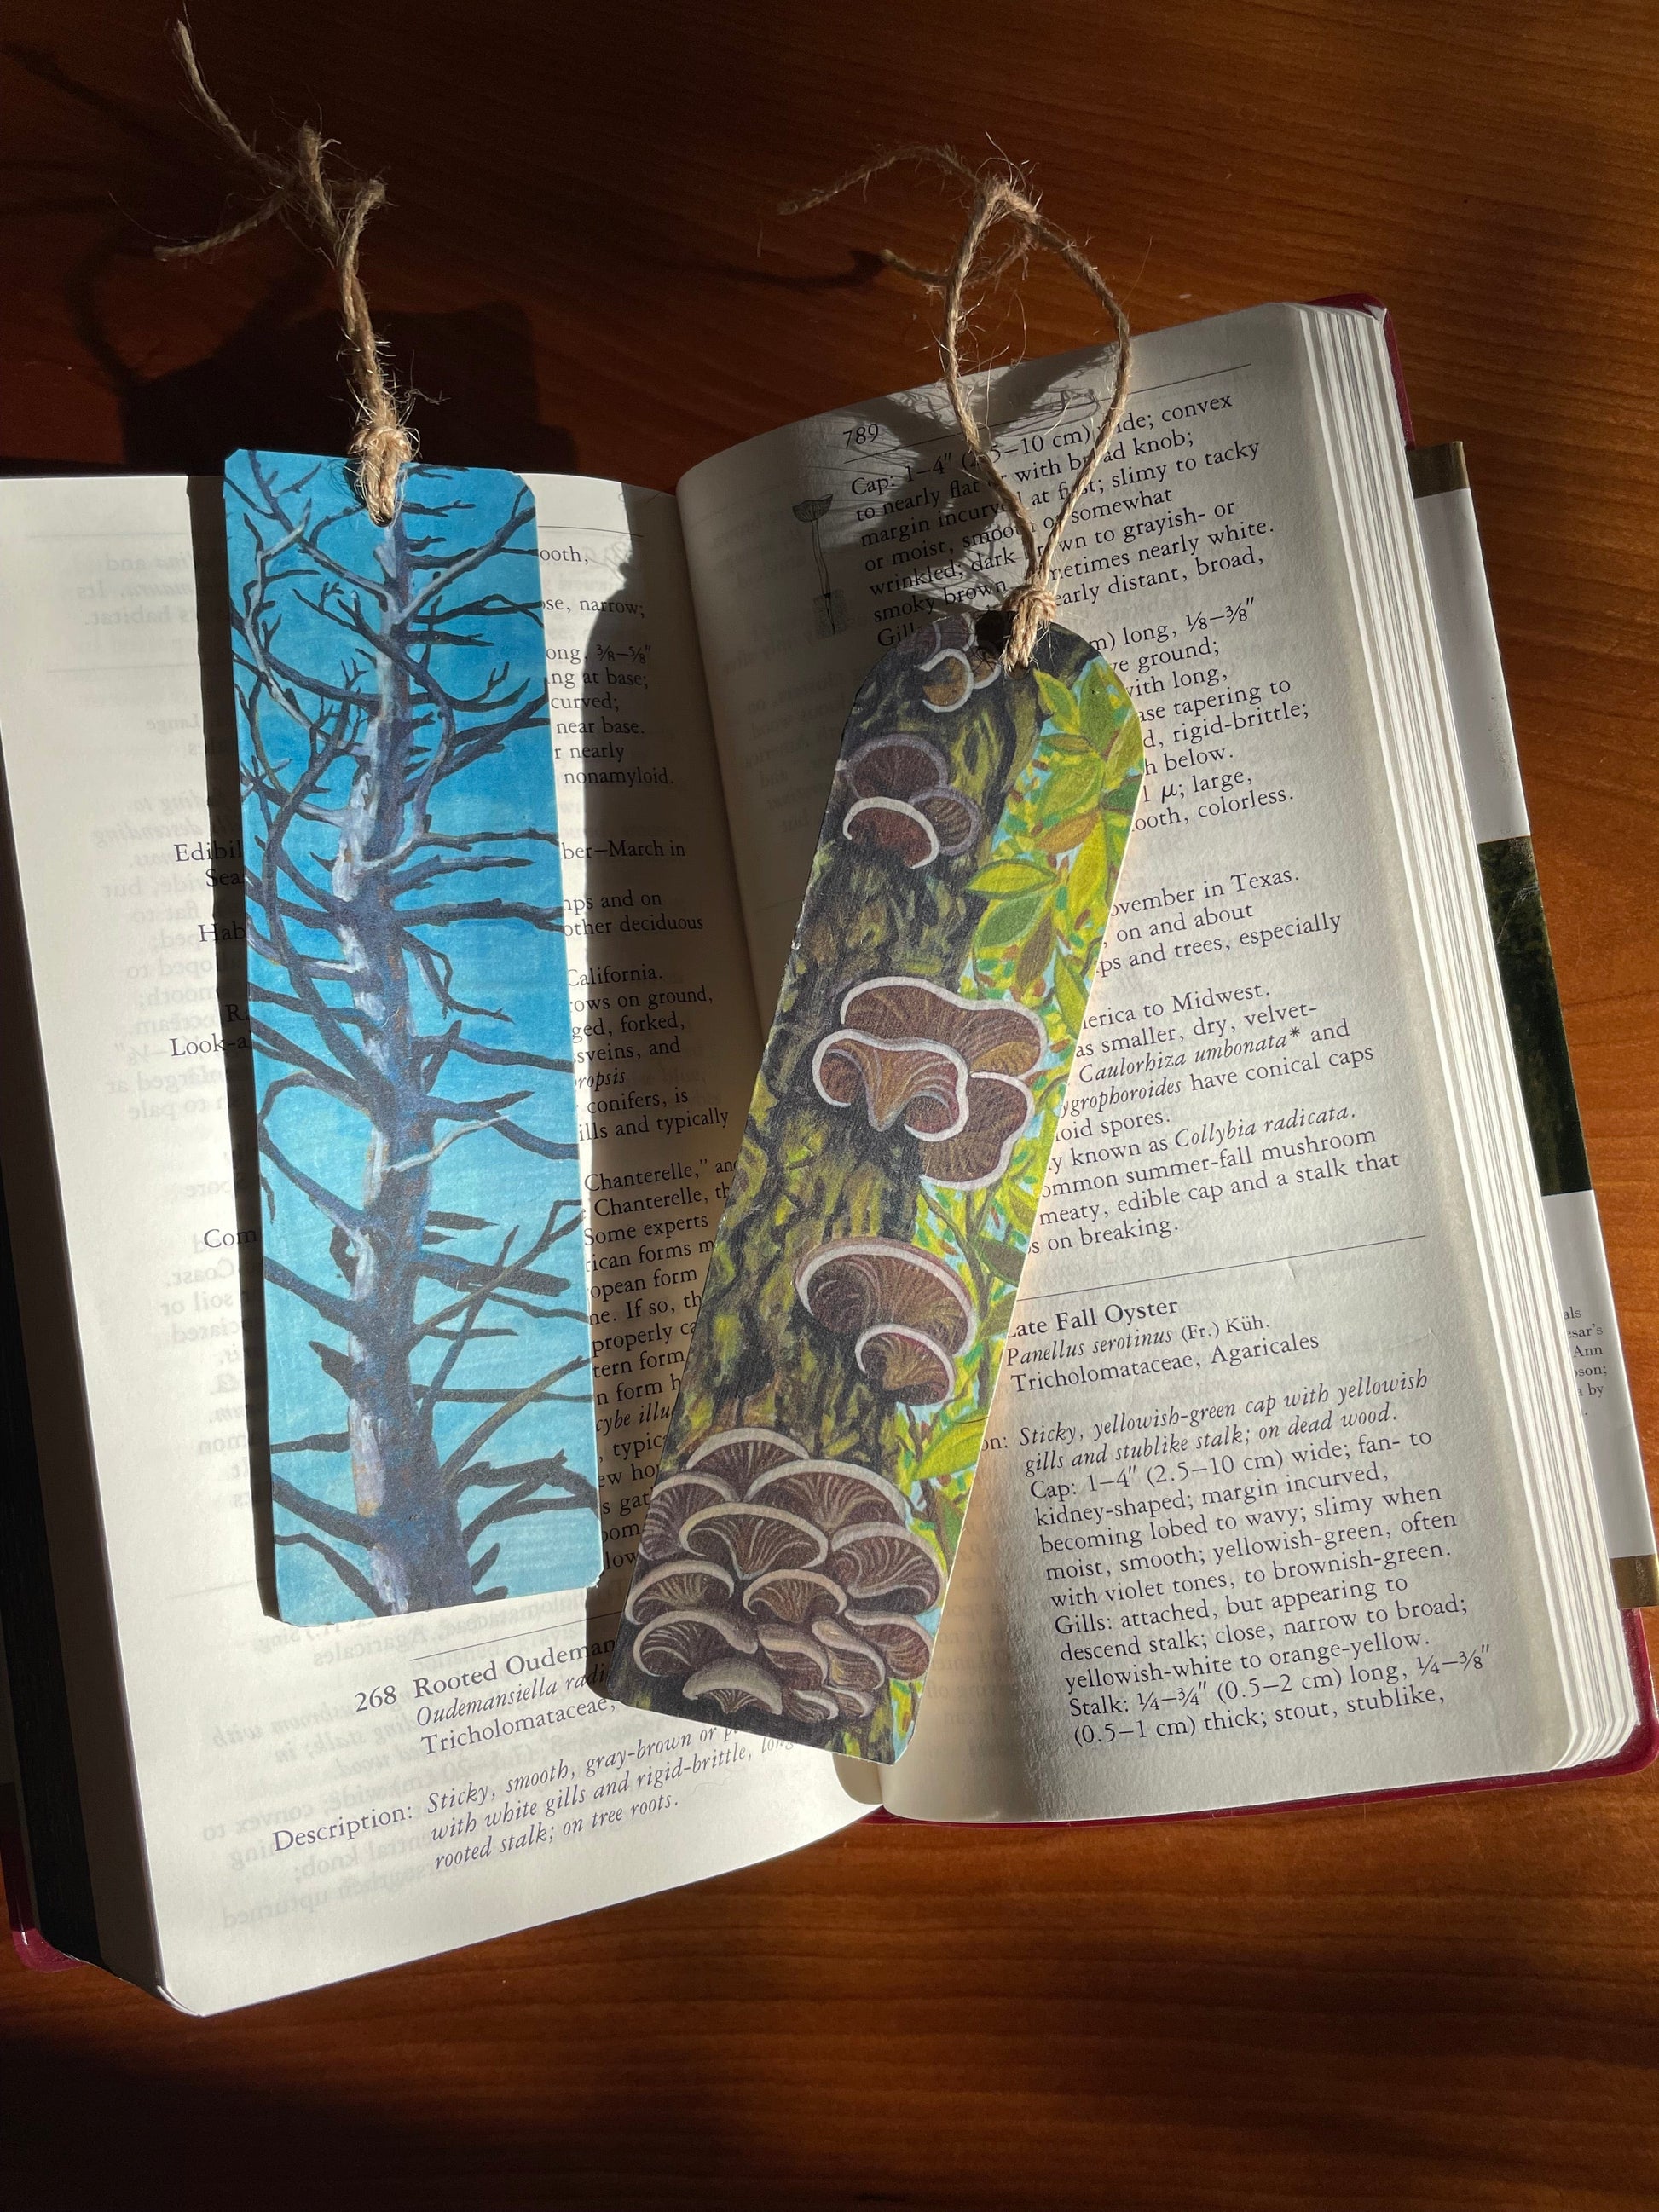 Oyster Mushroom Bookmark made by brandy cressey at florence farmstead.